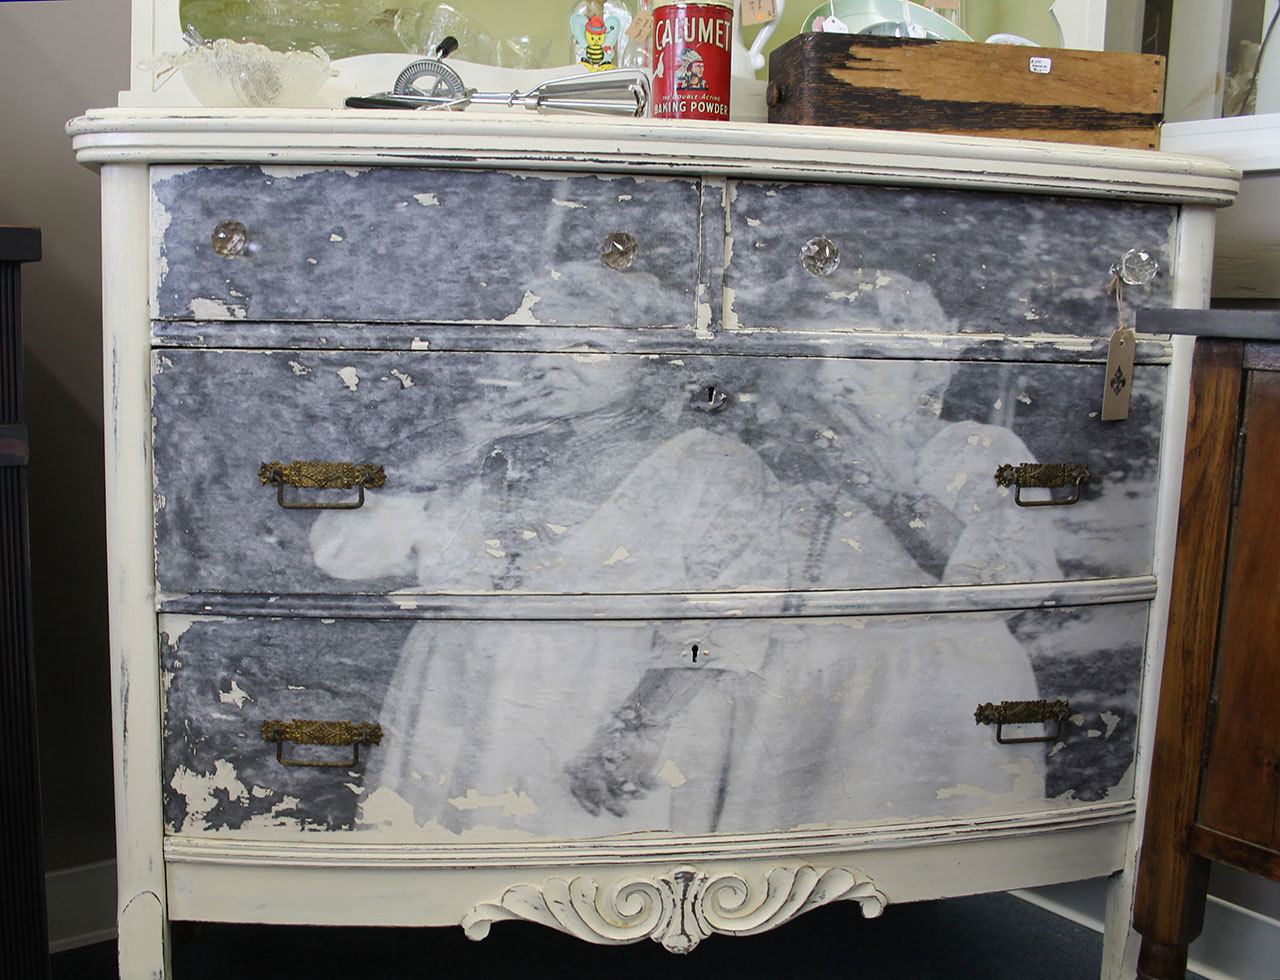 You’ll find antiques, vintage items, and retro items at the Kitsap Antique & Vintage Show, Feb. 25 and 26 at the Kitsap County Fairgrounds. This dresser, which features a lighthearted image of two elderly women smoking, is at Re-Noun, which will have a presence at the show. (Richard Walker/Kitsap News Group)